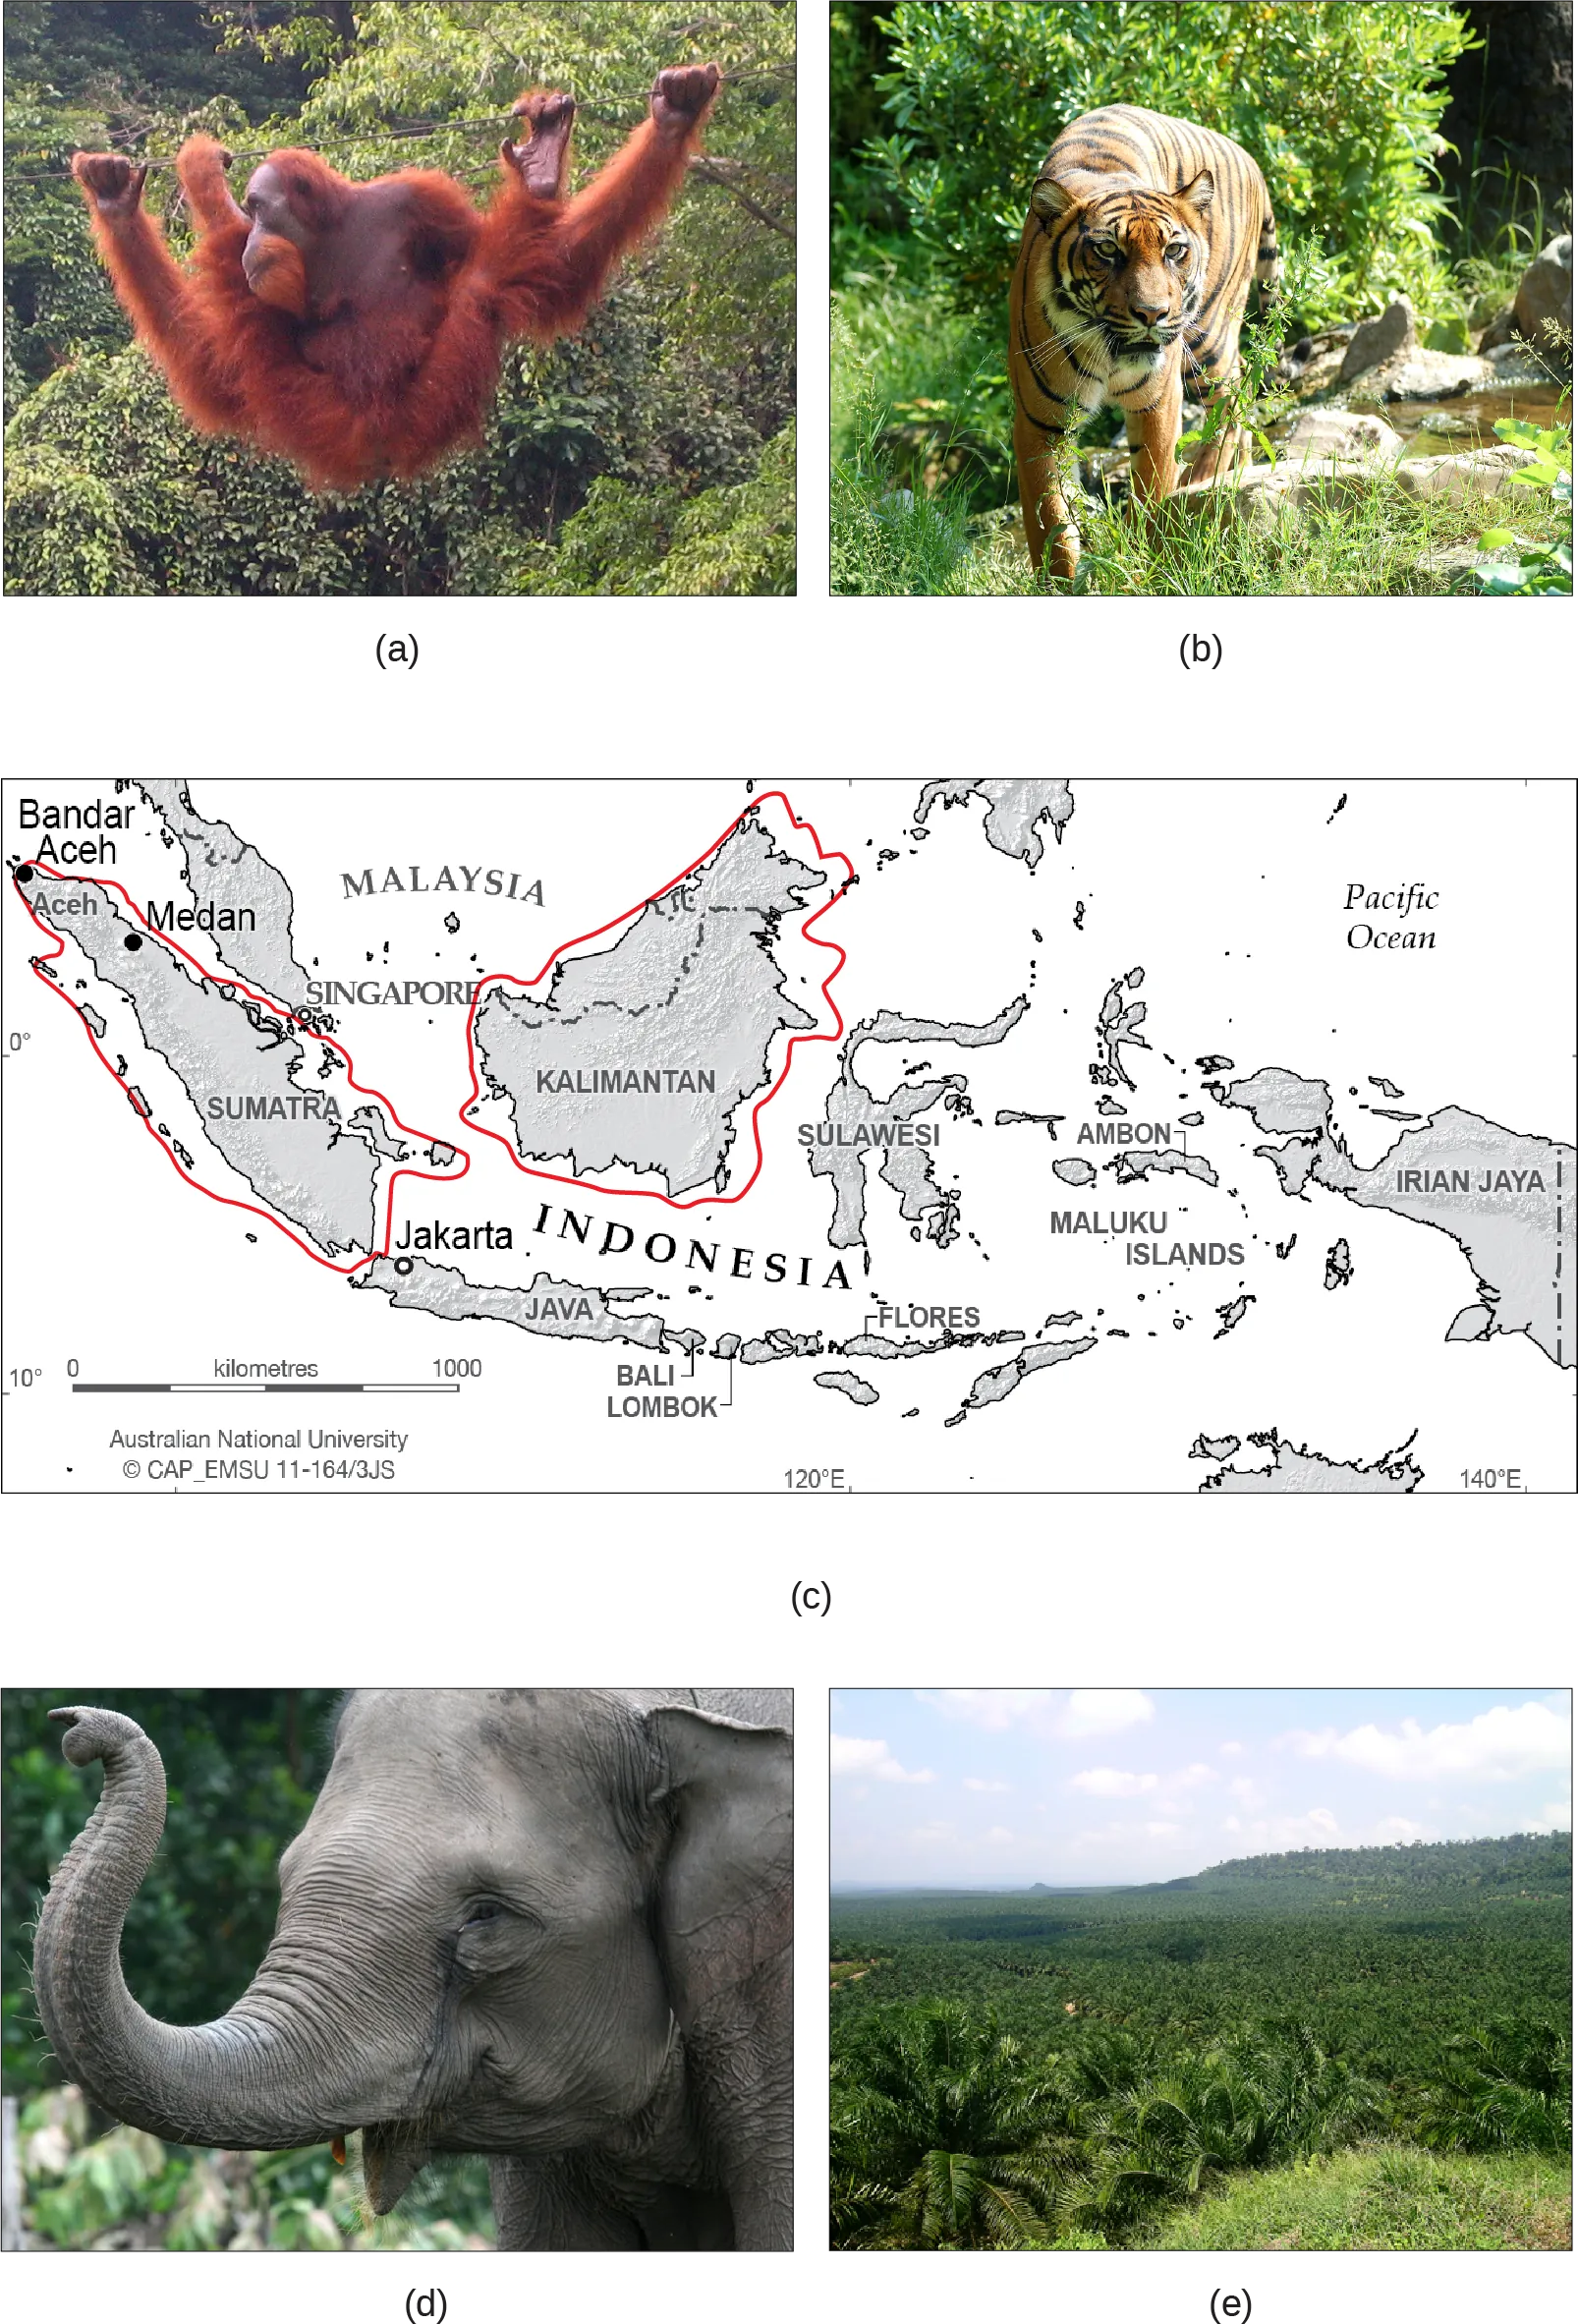  Photo A shows an orangutan hanging from a wire in a lush rainforest filled with many different kinds of vegetation. Photo B shows a tiger. Map C shows the islands of Borneo and Sumatra in the south Pacific, just northwest of Australia. Sumatra is in the country of Indonesia. Half of Borneo is in Indonesia, and half is in Malaysia. Photo D shows a gray elephant. Photo E shows rolling hills covered with homogenous short, bushy oil palm trees.